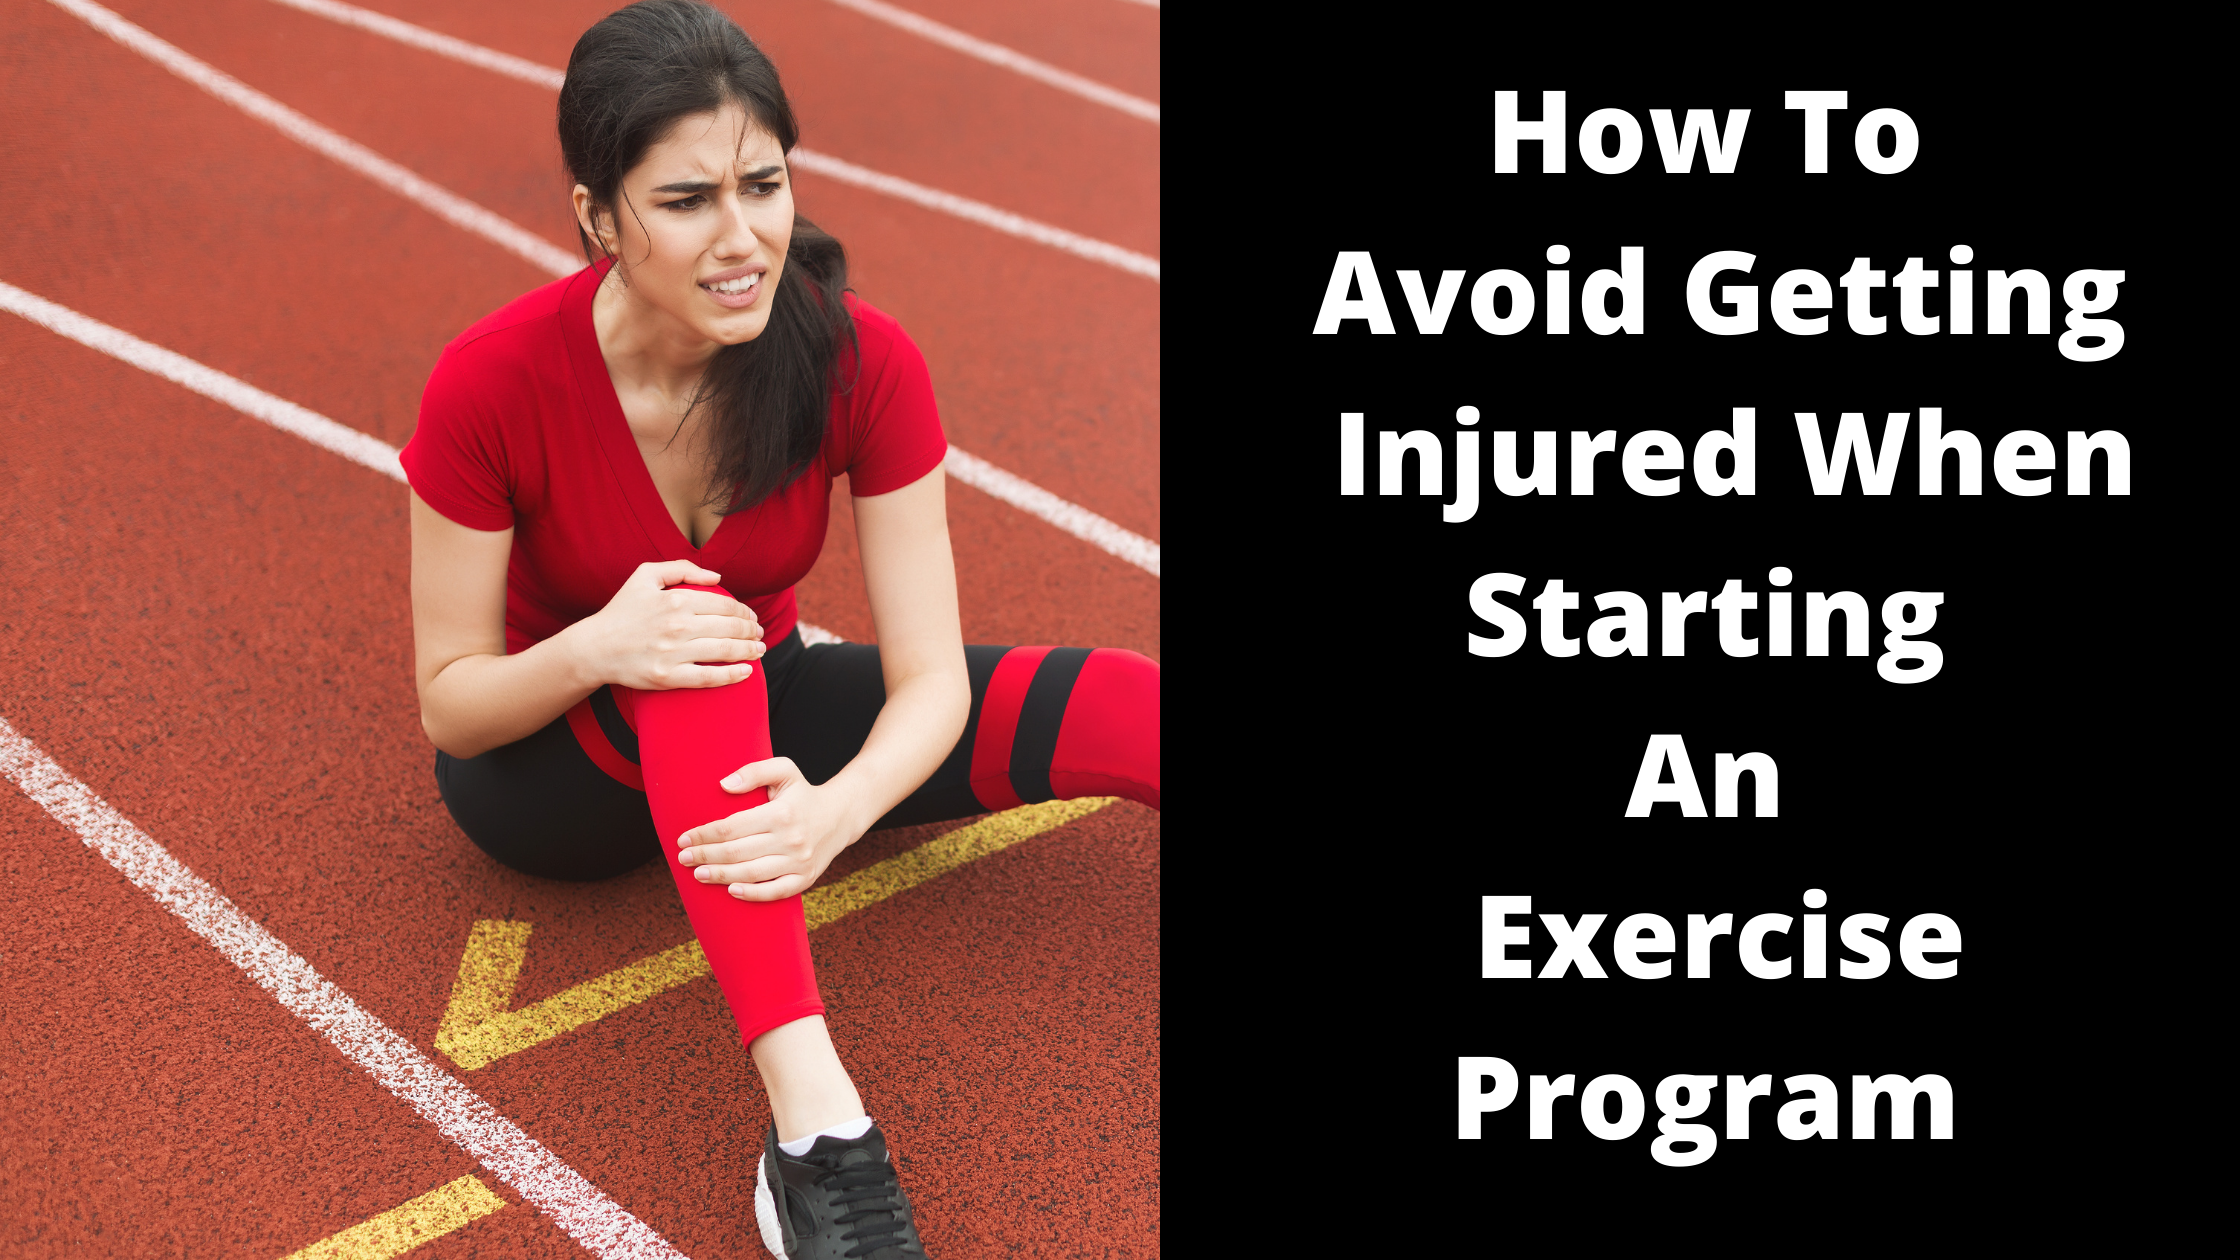 How To Avoid Getting Injured When Starting An Exercise Program